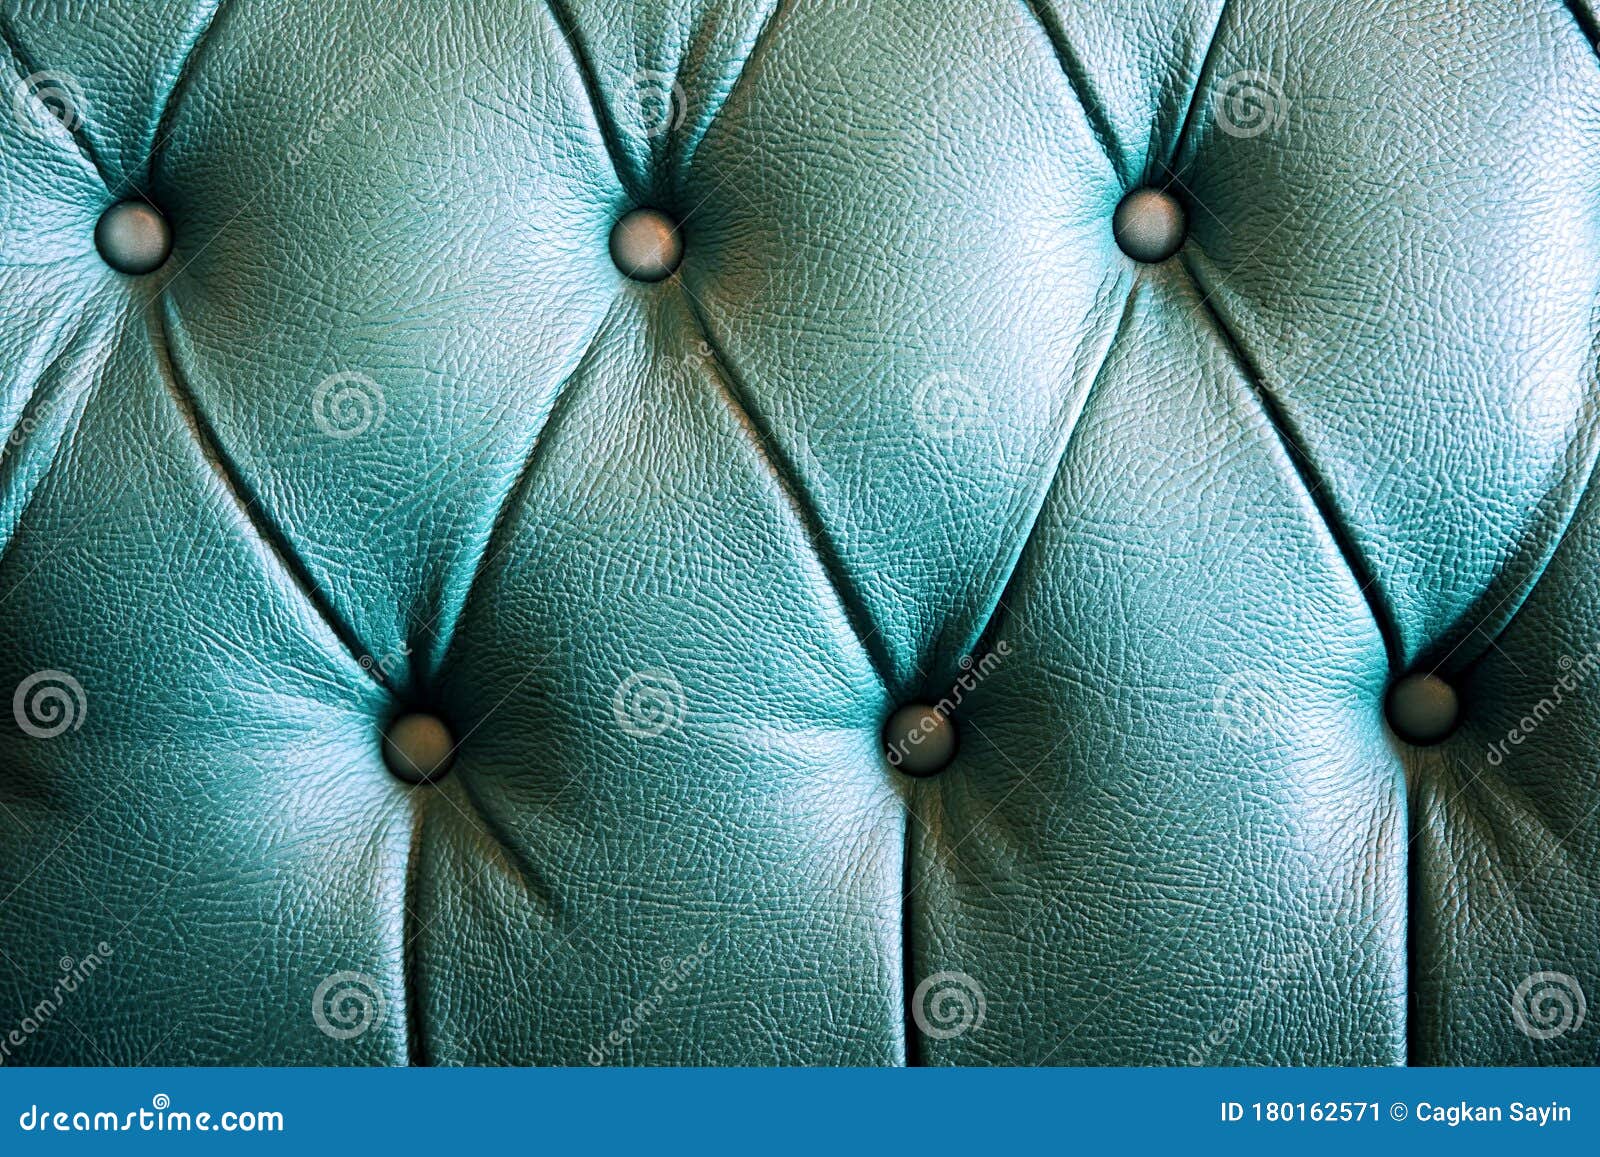 Green Leather Chesterfield Sofa Upholstery Stock Image Image Of Divan Couch 180162571